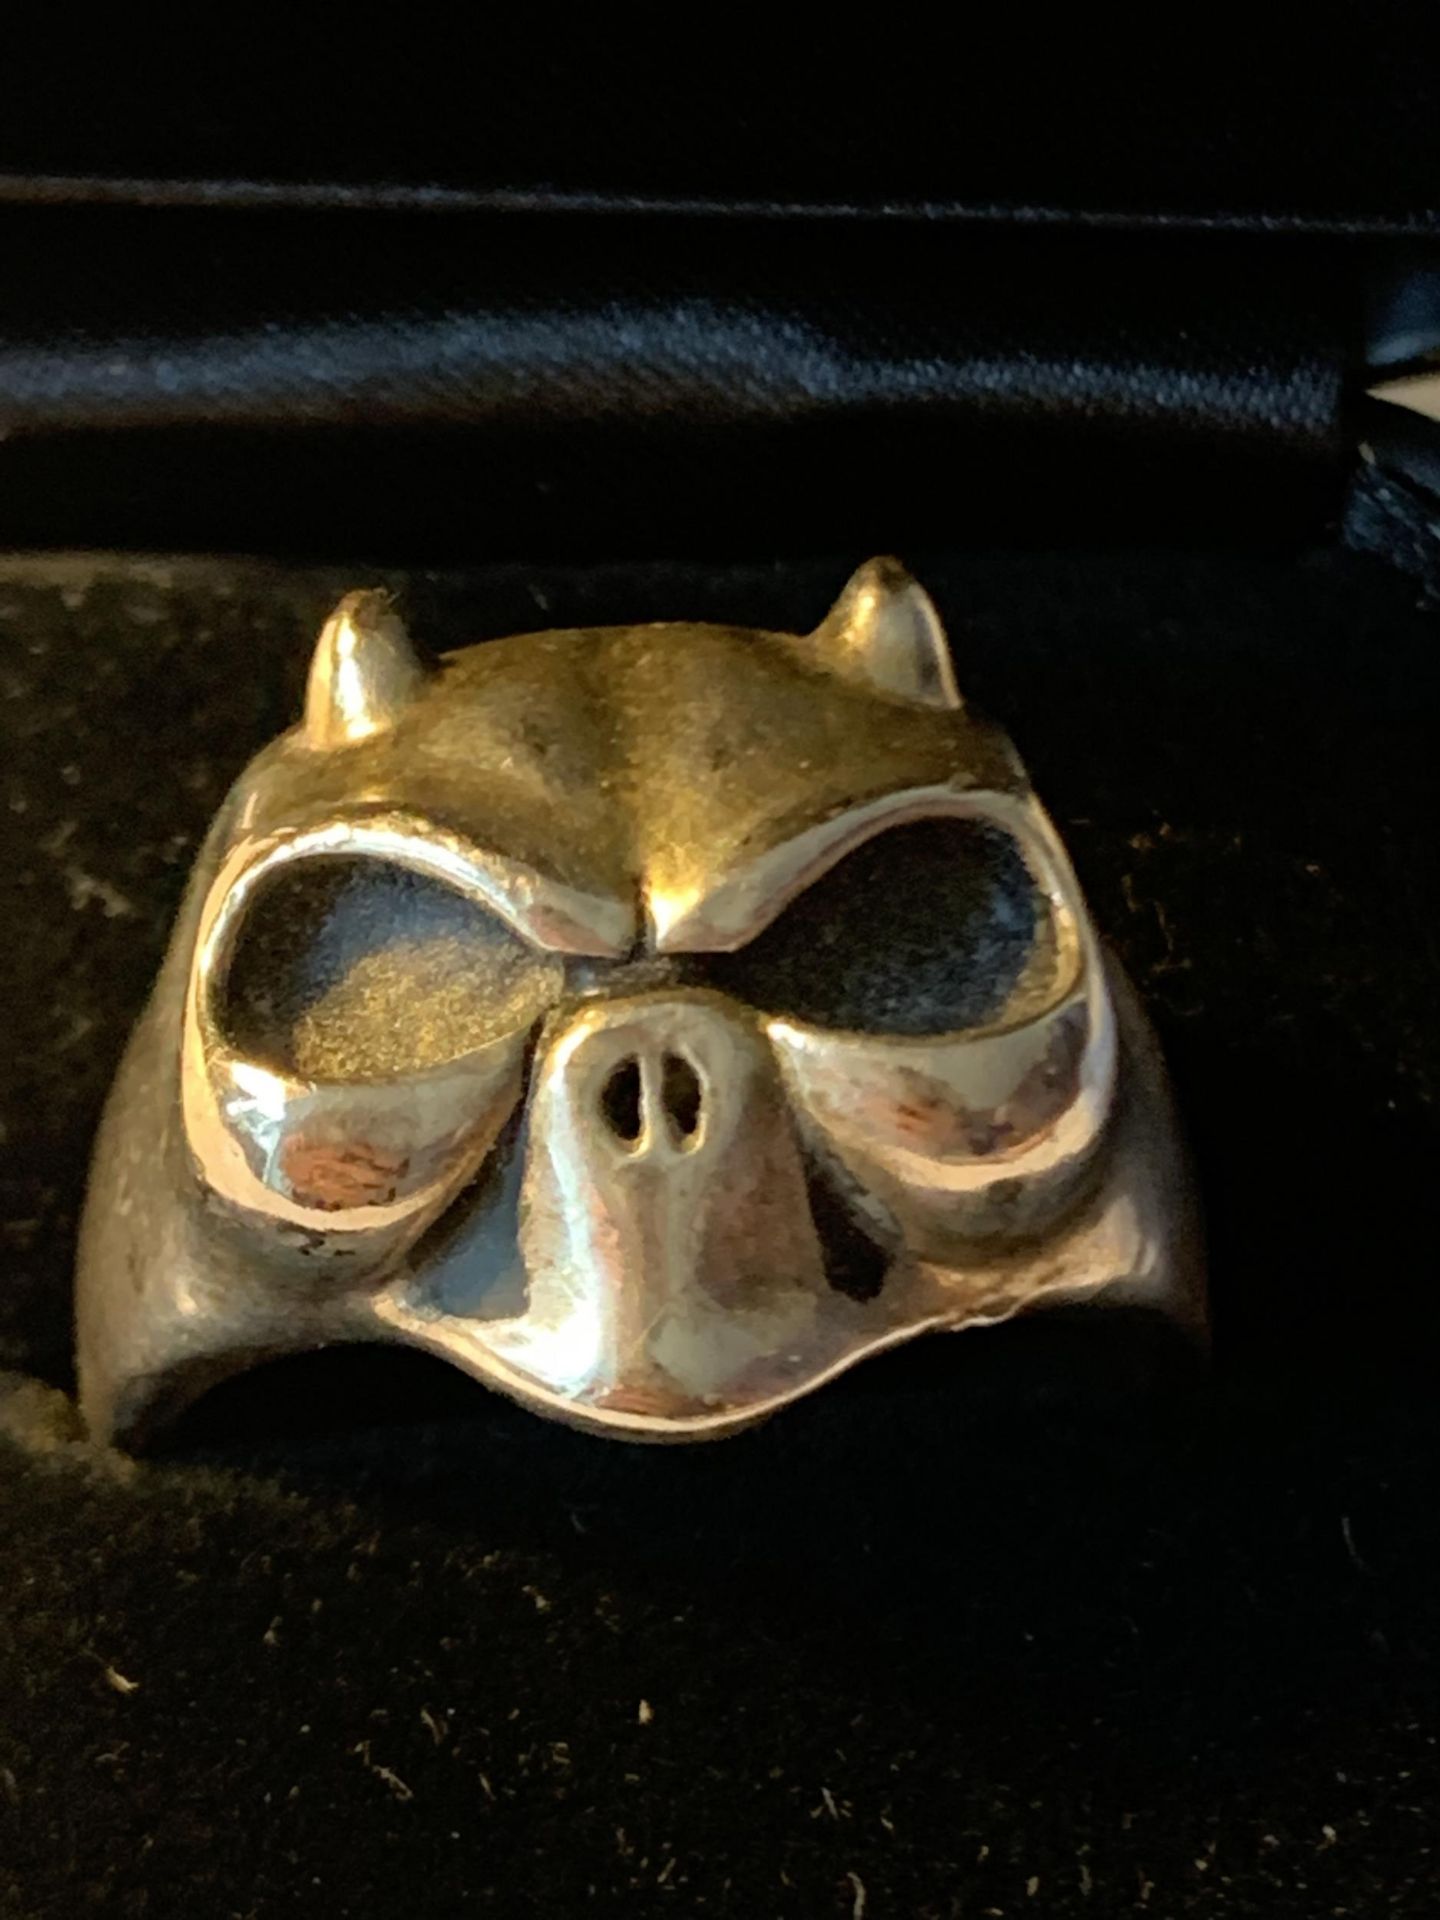 A LARGE SKULL RING IN A PRESENTATION BOX - Image 2 of 3